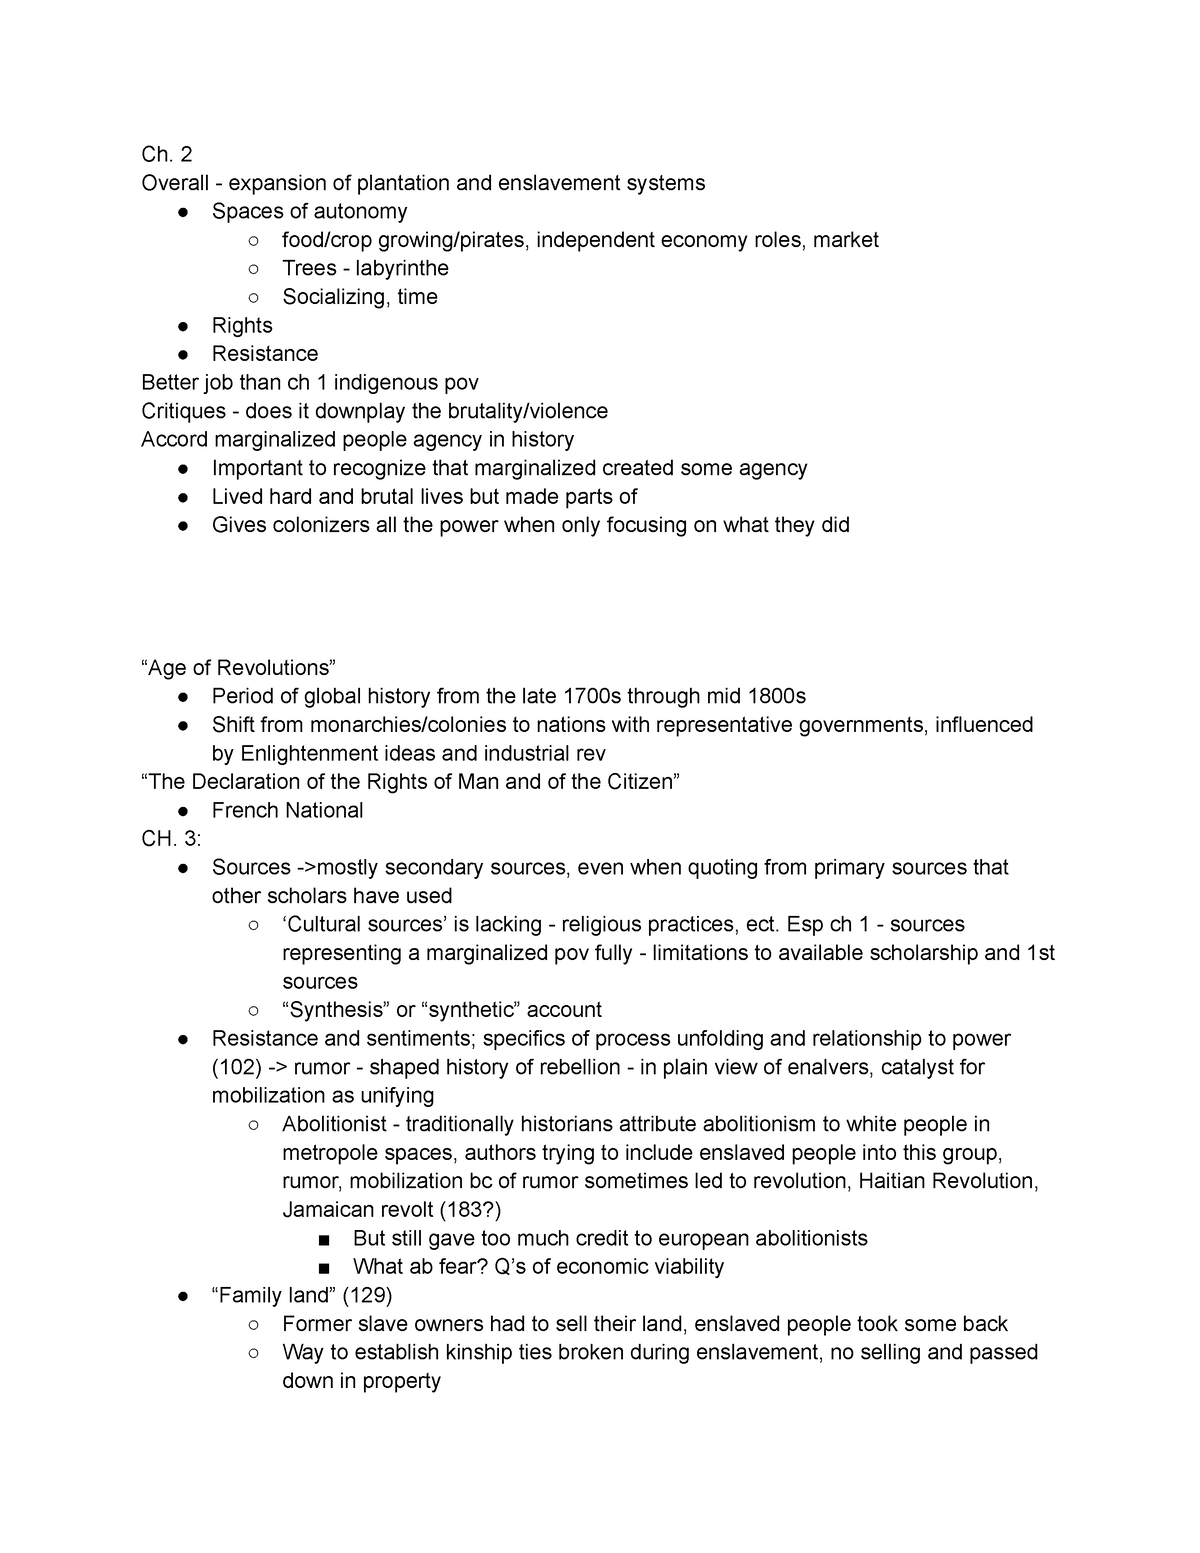 4 - lecture notes from Dr. Waterhouse - Ch. 2 Overall - expansion of ...